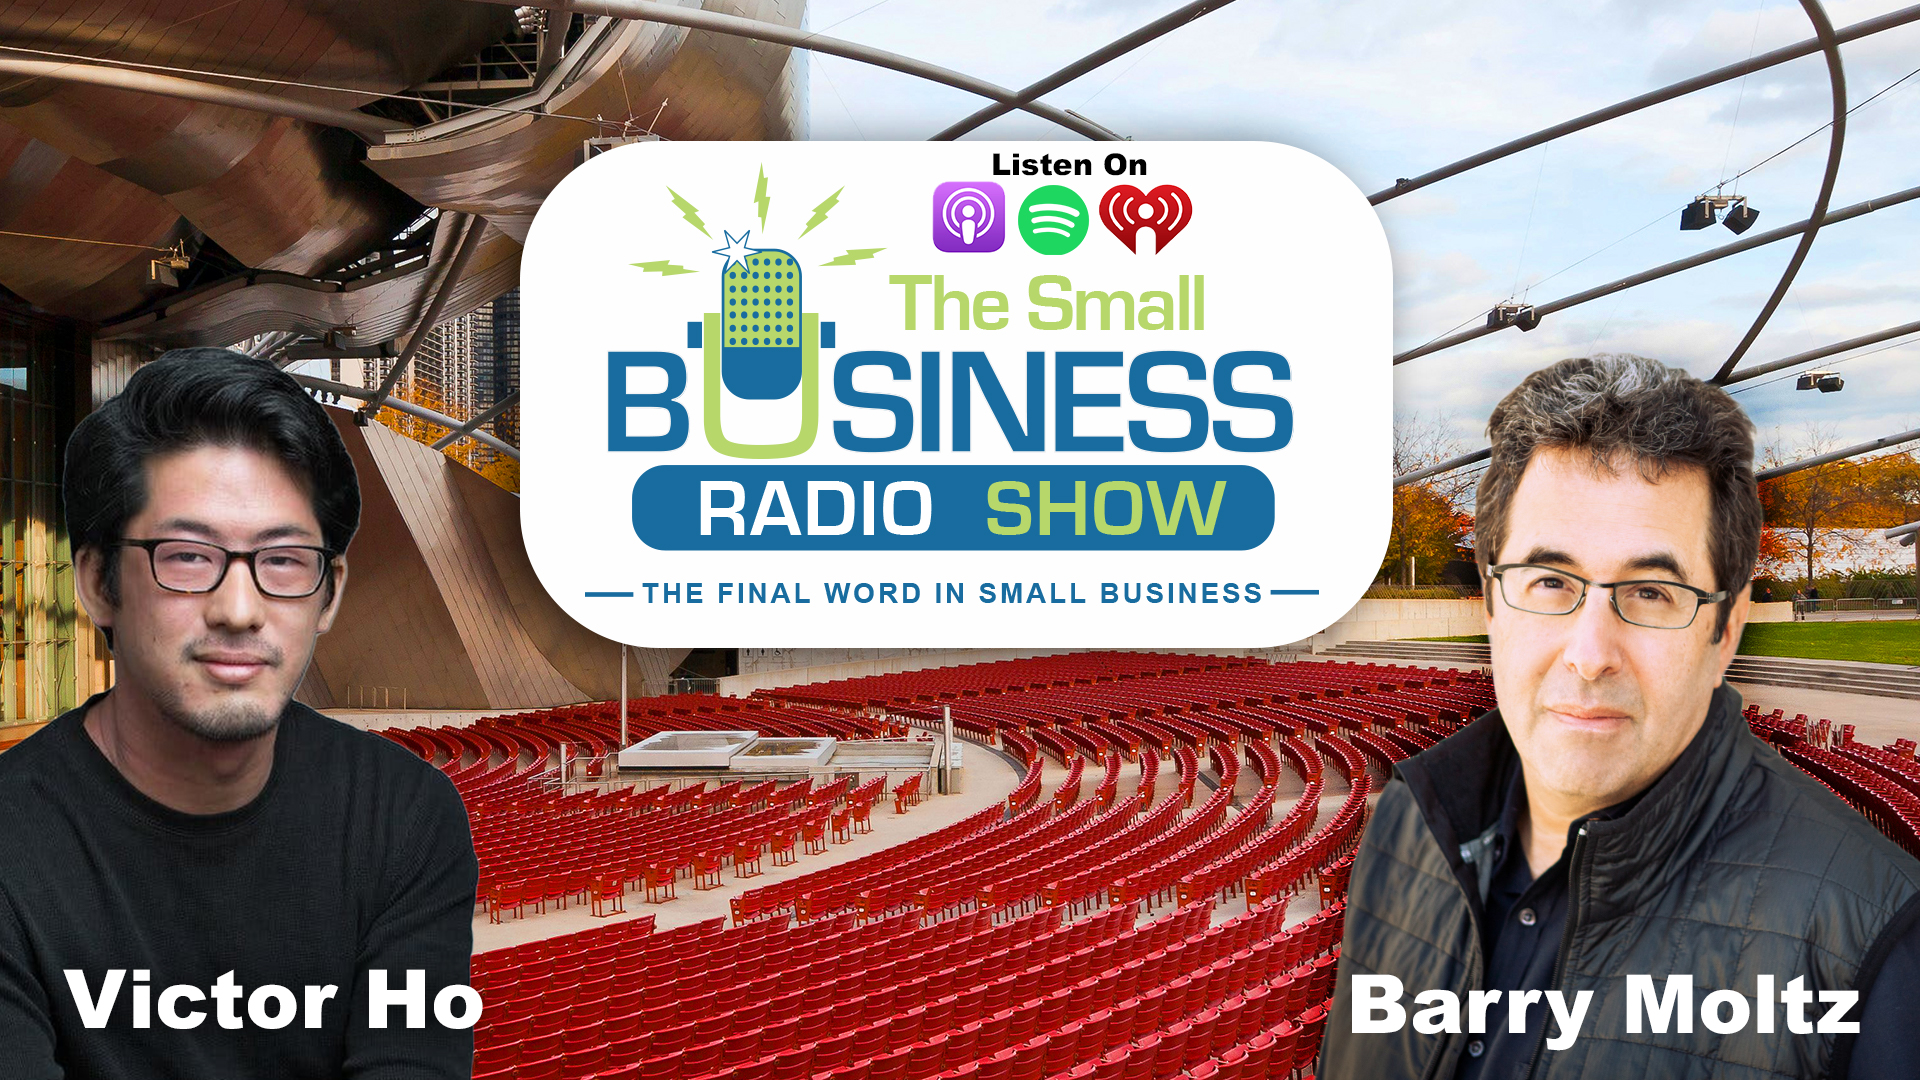 Victor Ho on The Small Business Radio Show